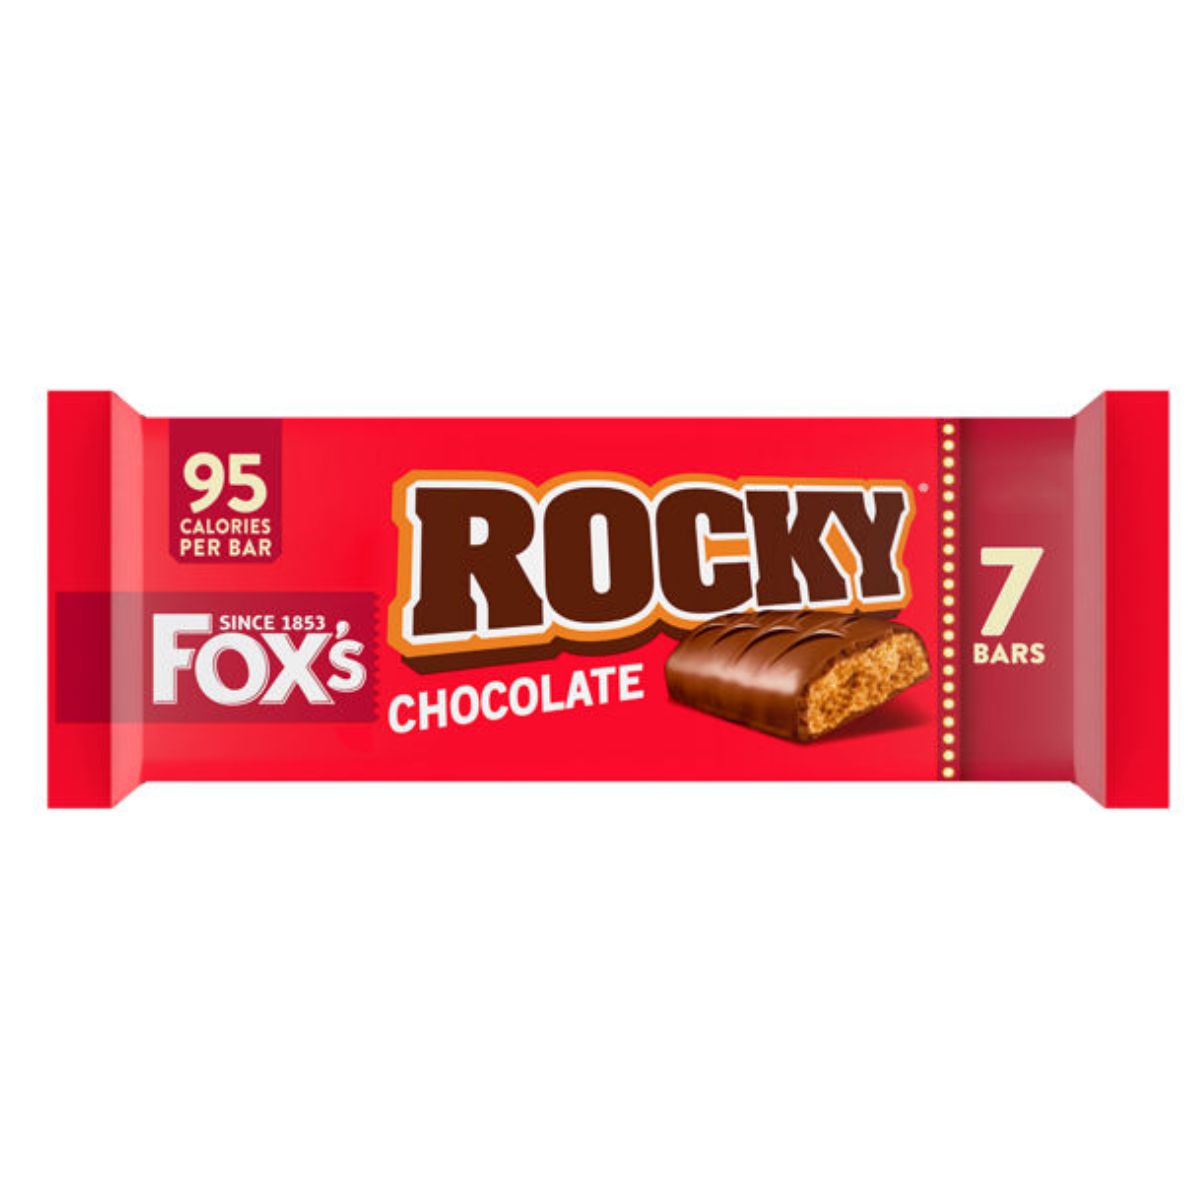 Packaging of Foxs - Rocky Chocolate Bars - 7 x 19g, displaying 7 bars with "95 calories per bar" noted, against a red background.